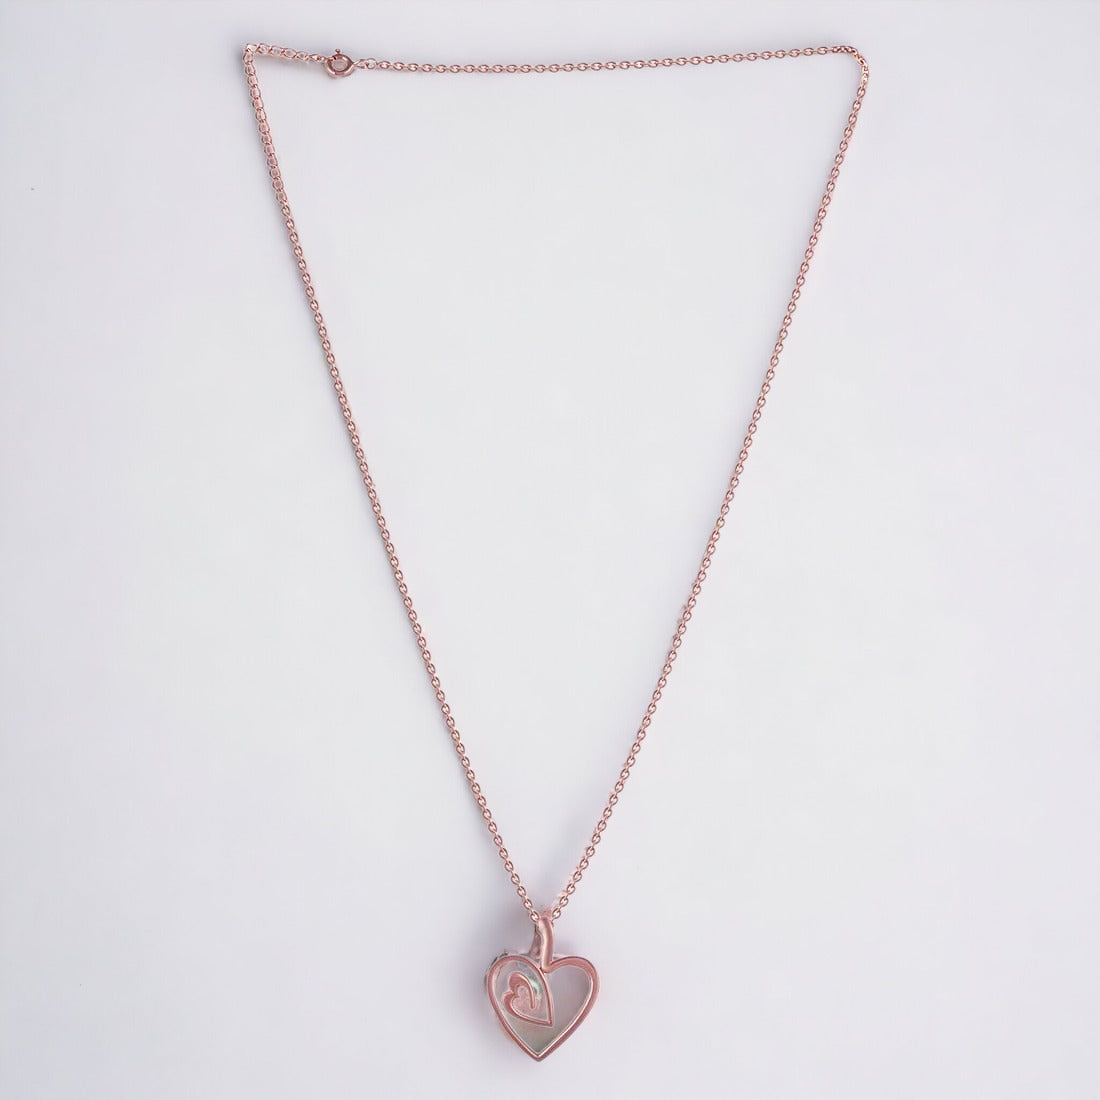 Heart Pendant With Chain For Women & Girls